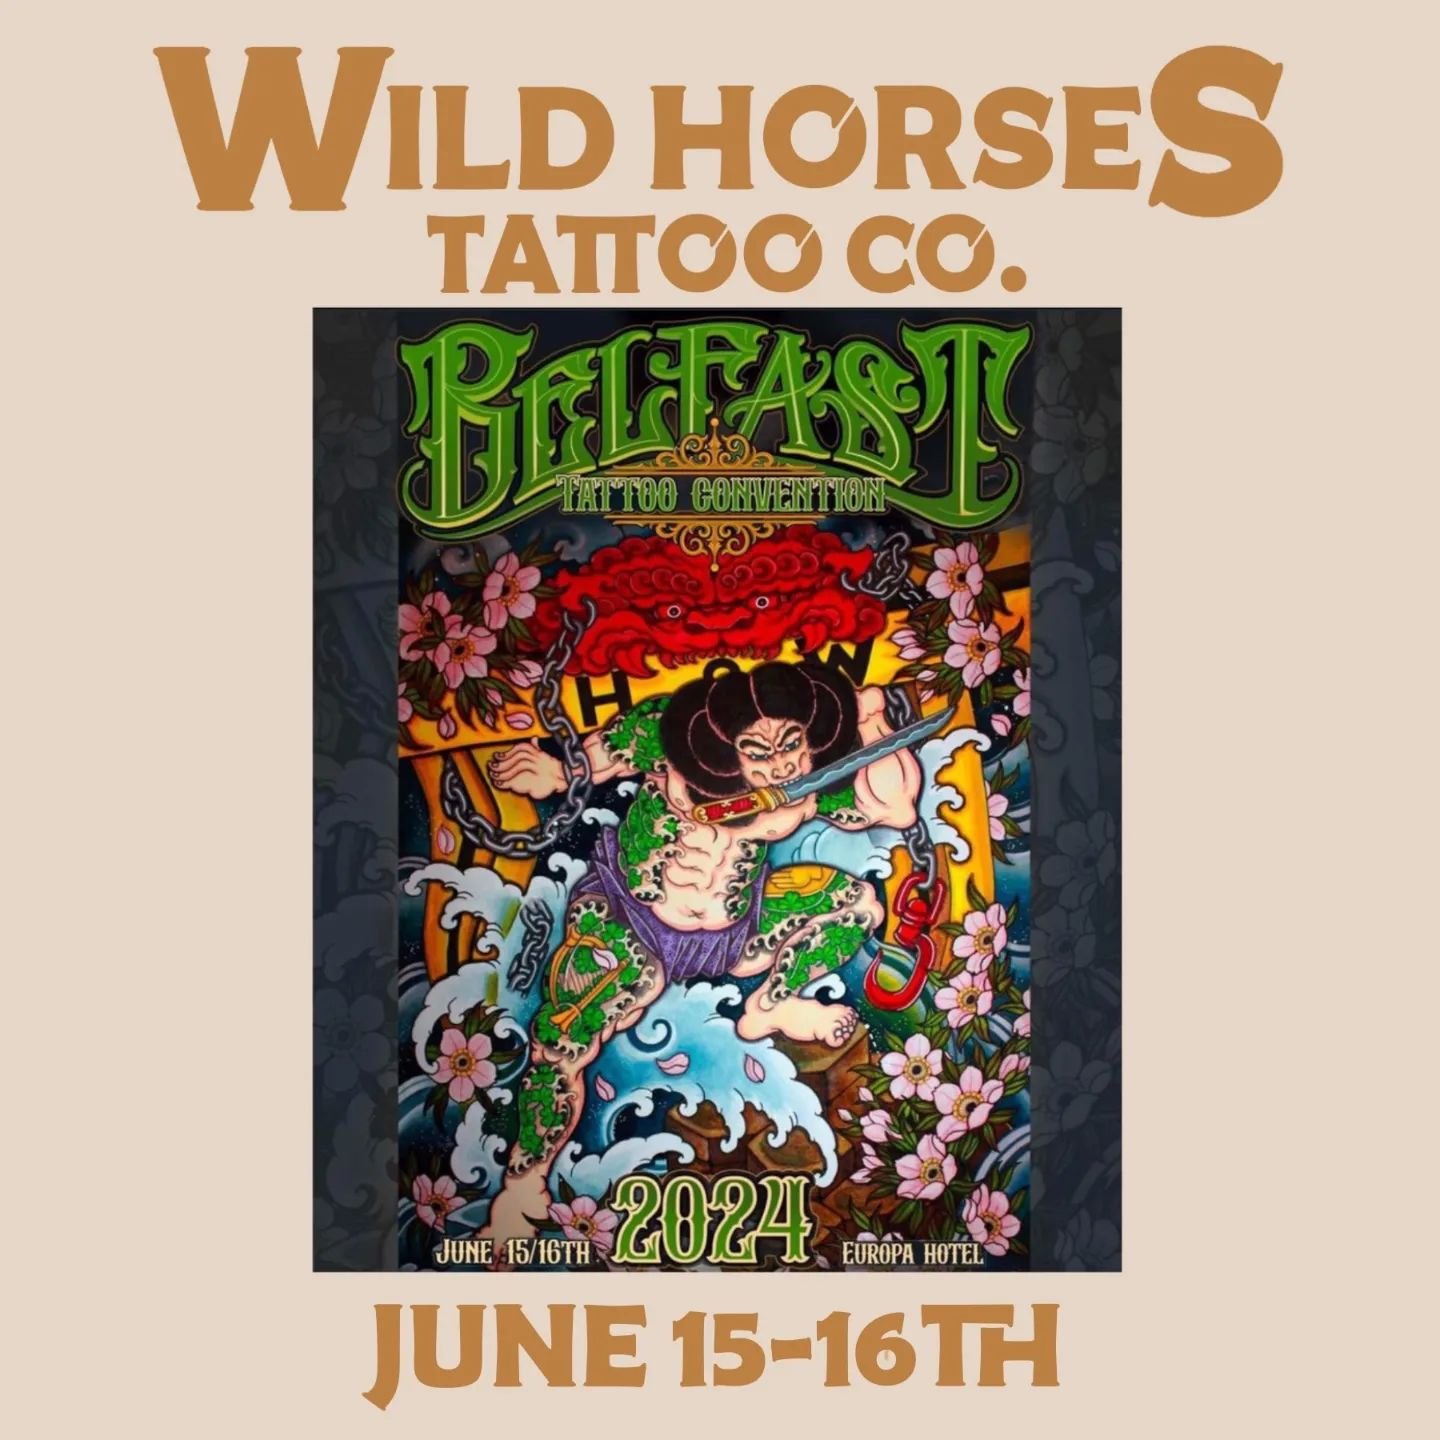 ⭐️ BELFAST ⭐️

@dannywildhorses &amp; @goodlucktoni will be working at @belfasttattooconvention on the 15th-16th June.

We will have some space for walk-ups over the weekend and will have plenty of tattoo flash at the ready.  Send us a message if you